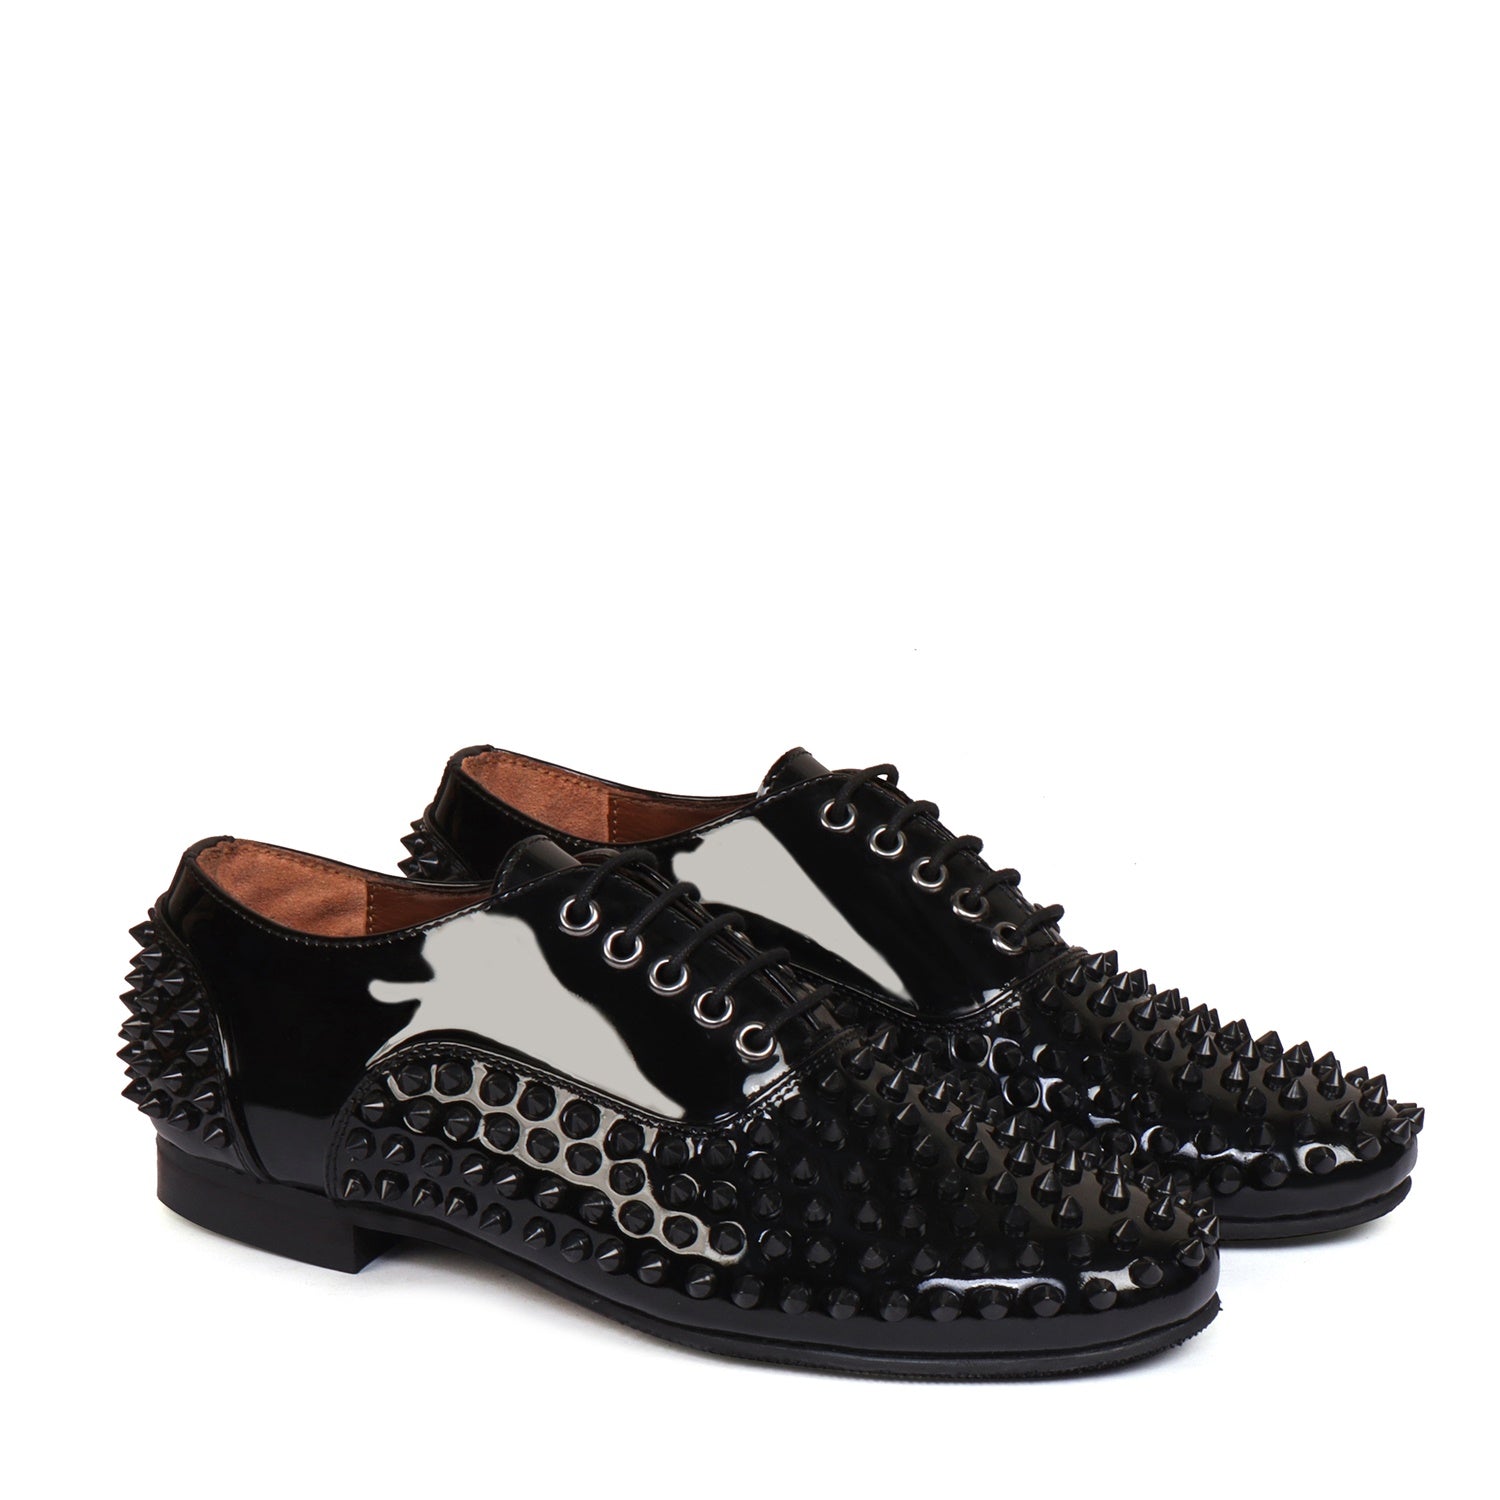 Toe And Counter Black Studded Patent Oxford Leather Lace-Up's Shoes For Men by Brune & Bareskin